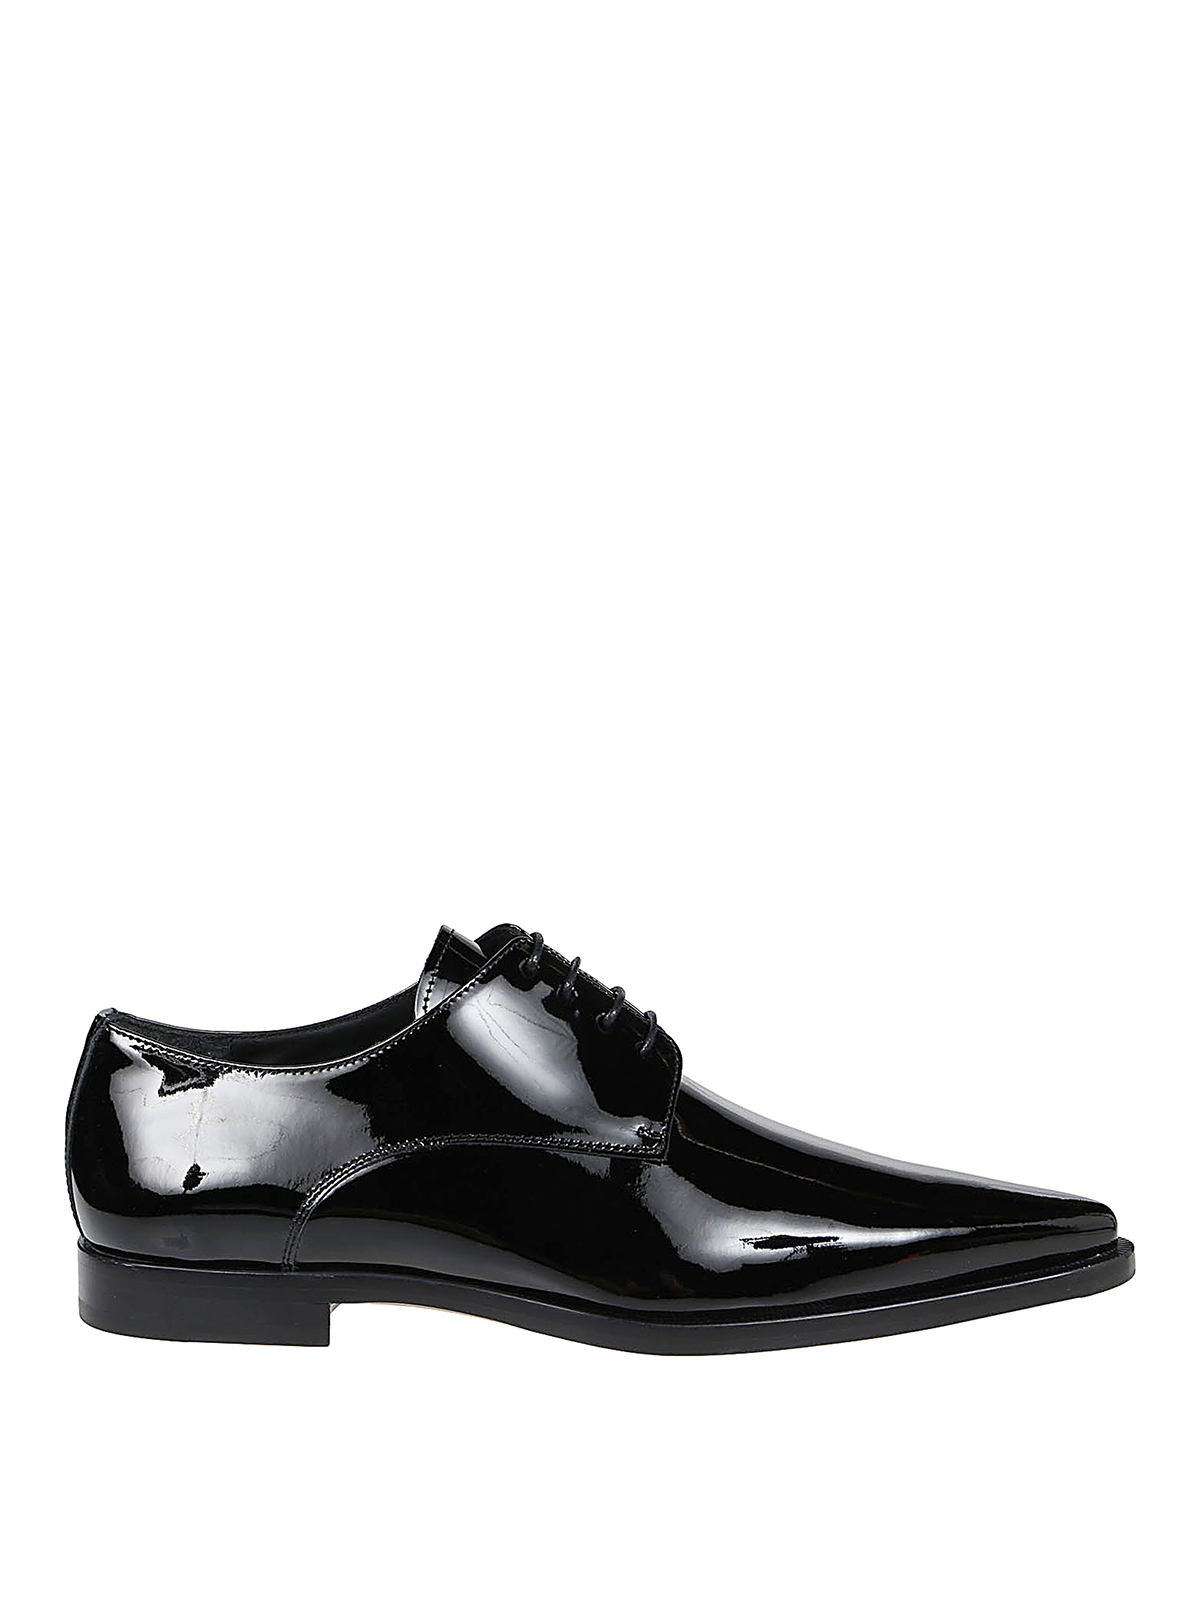 Dsquared2 Patent New Punk Derby Shoes In Black | ModeSens